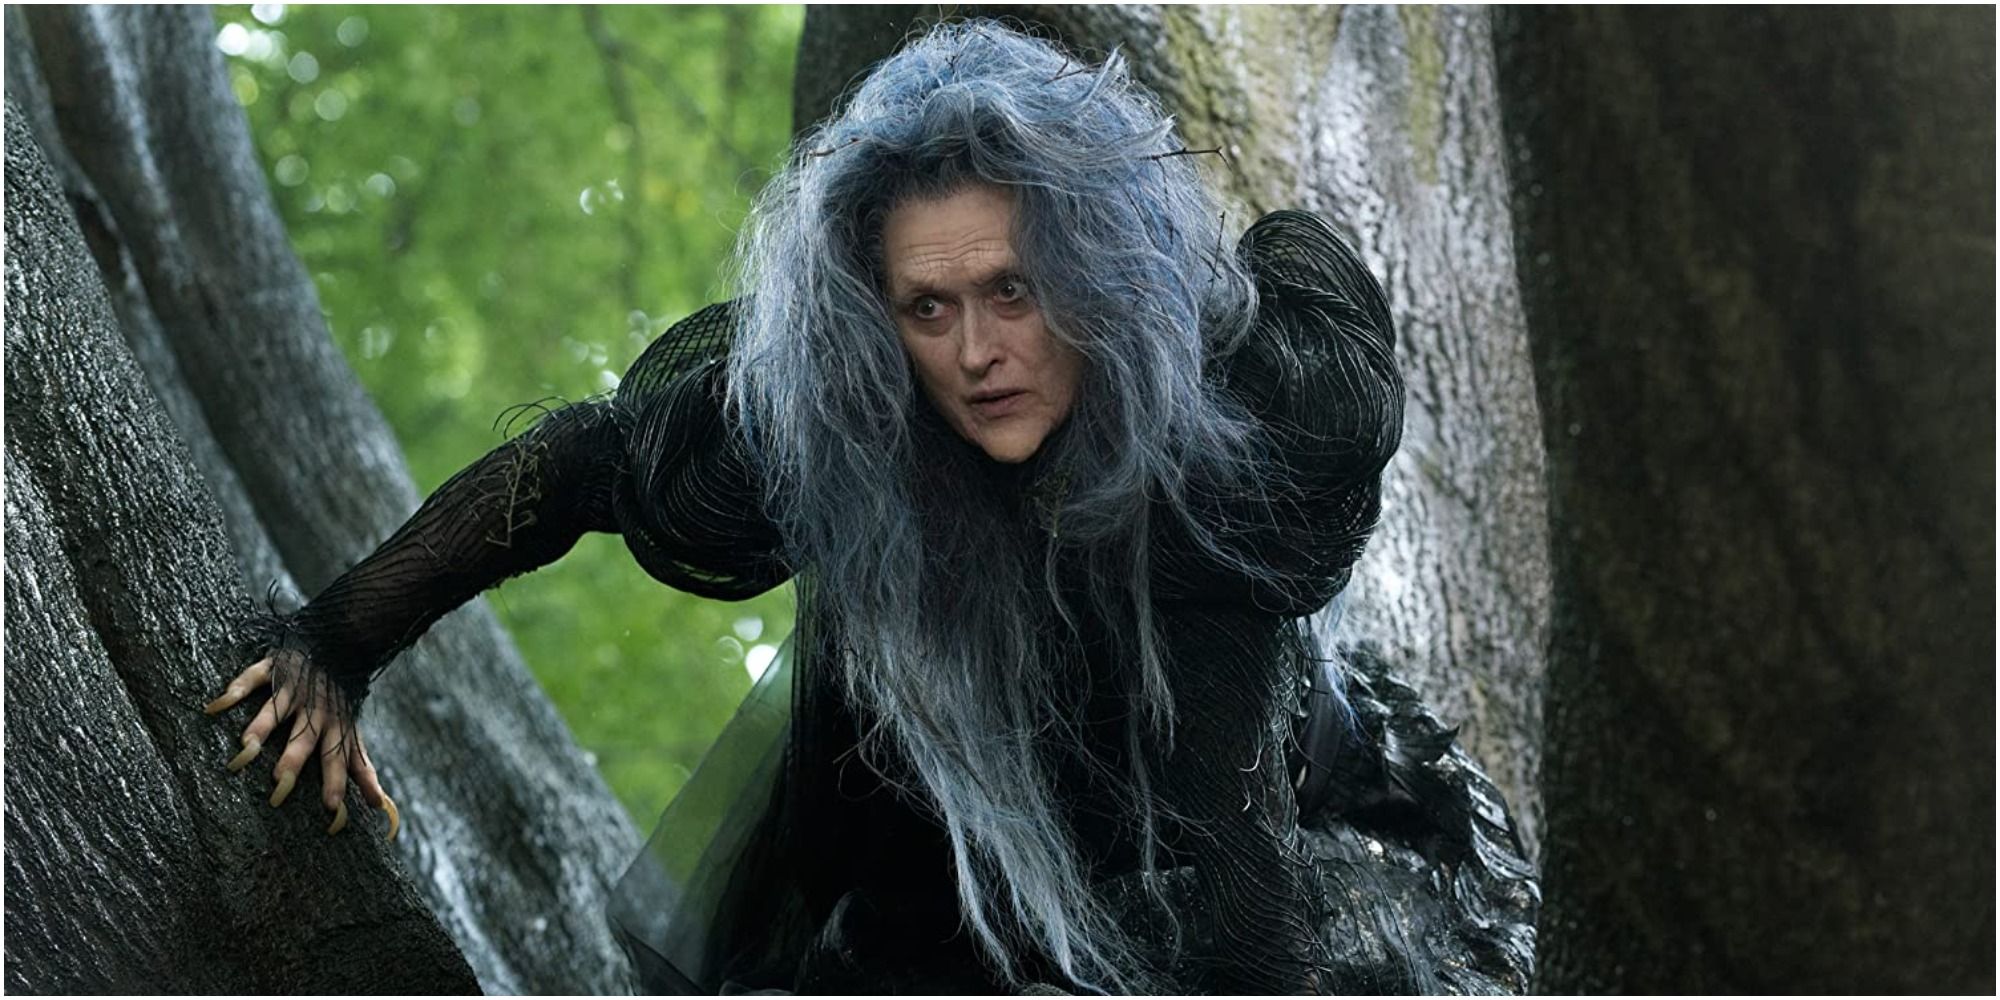 Meryl Streep as The Witch in Into The Woods